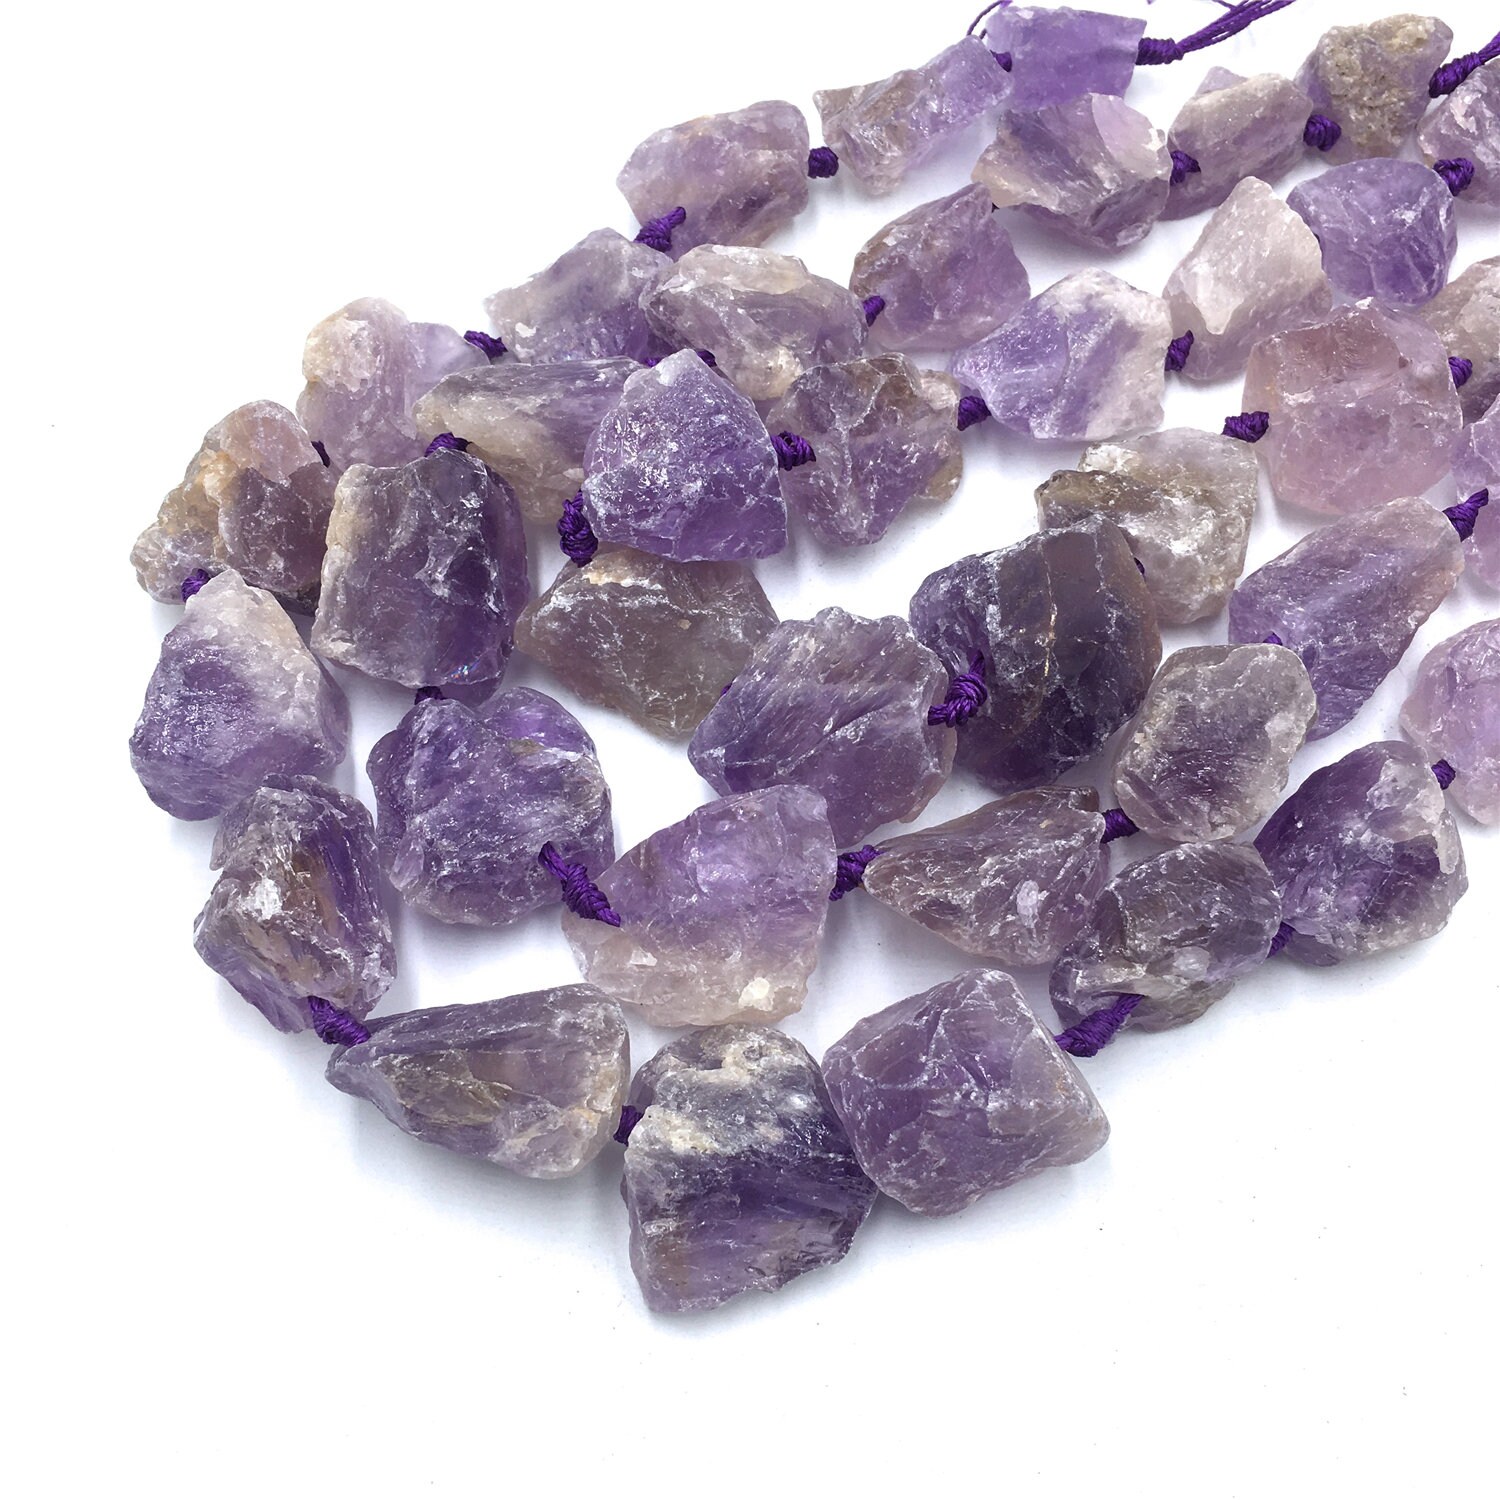 Natural Column Quartz Purple Amethyst Stone Beads For Jewelry Making String 15'' 